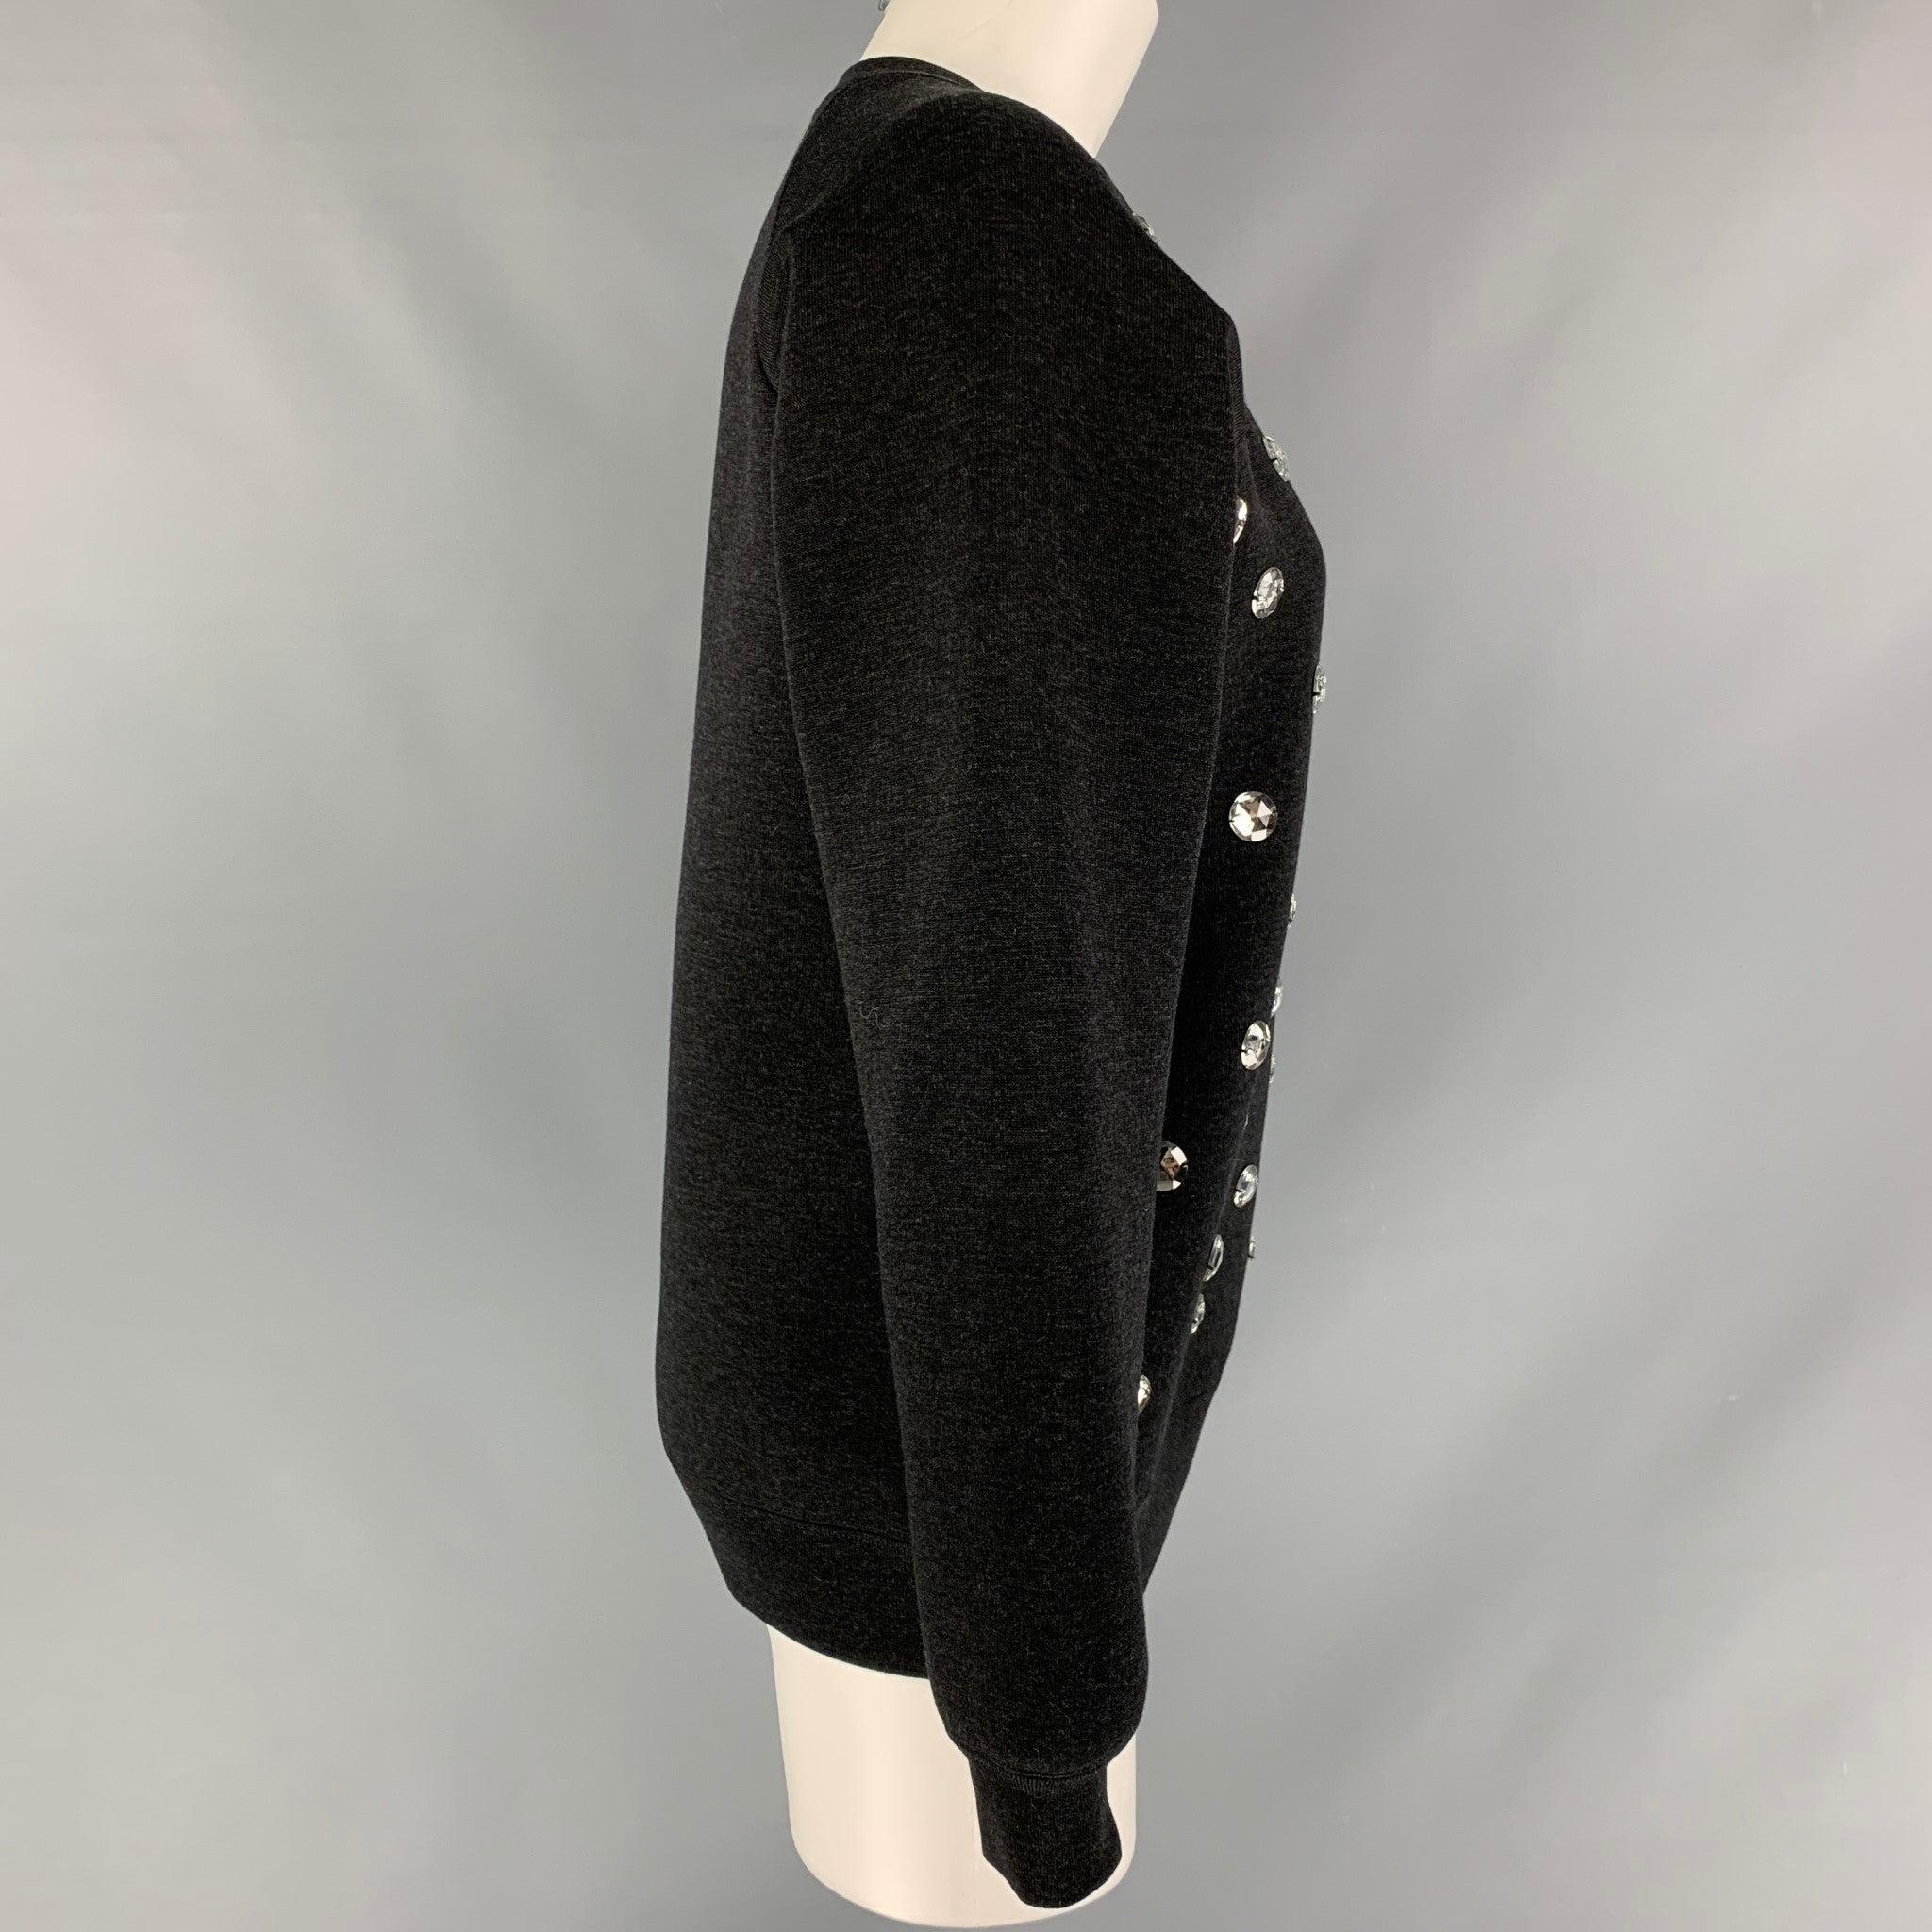 MARC JACOBS long sleeves pullover comes in a black wool blend heather jersey fabric featuring appliques at front. Made in Italy.Excellent Pre-Owned Condition. 

Marked:   XS 

Measurements: 
 
Shoulder: 16.5 inches Bust: 40 inches Sleeve: 23.5